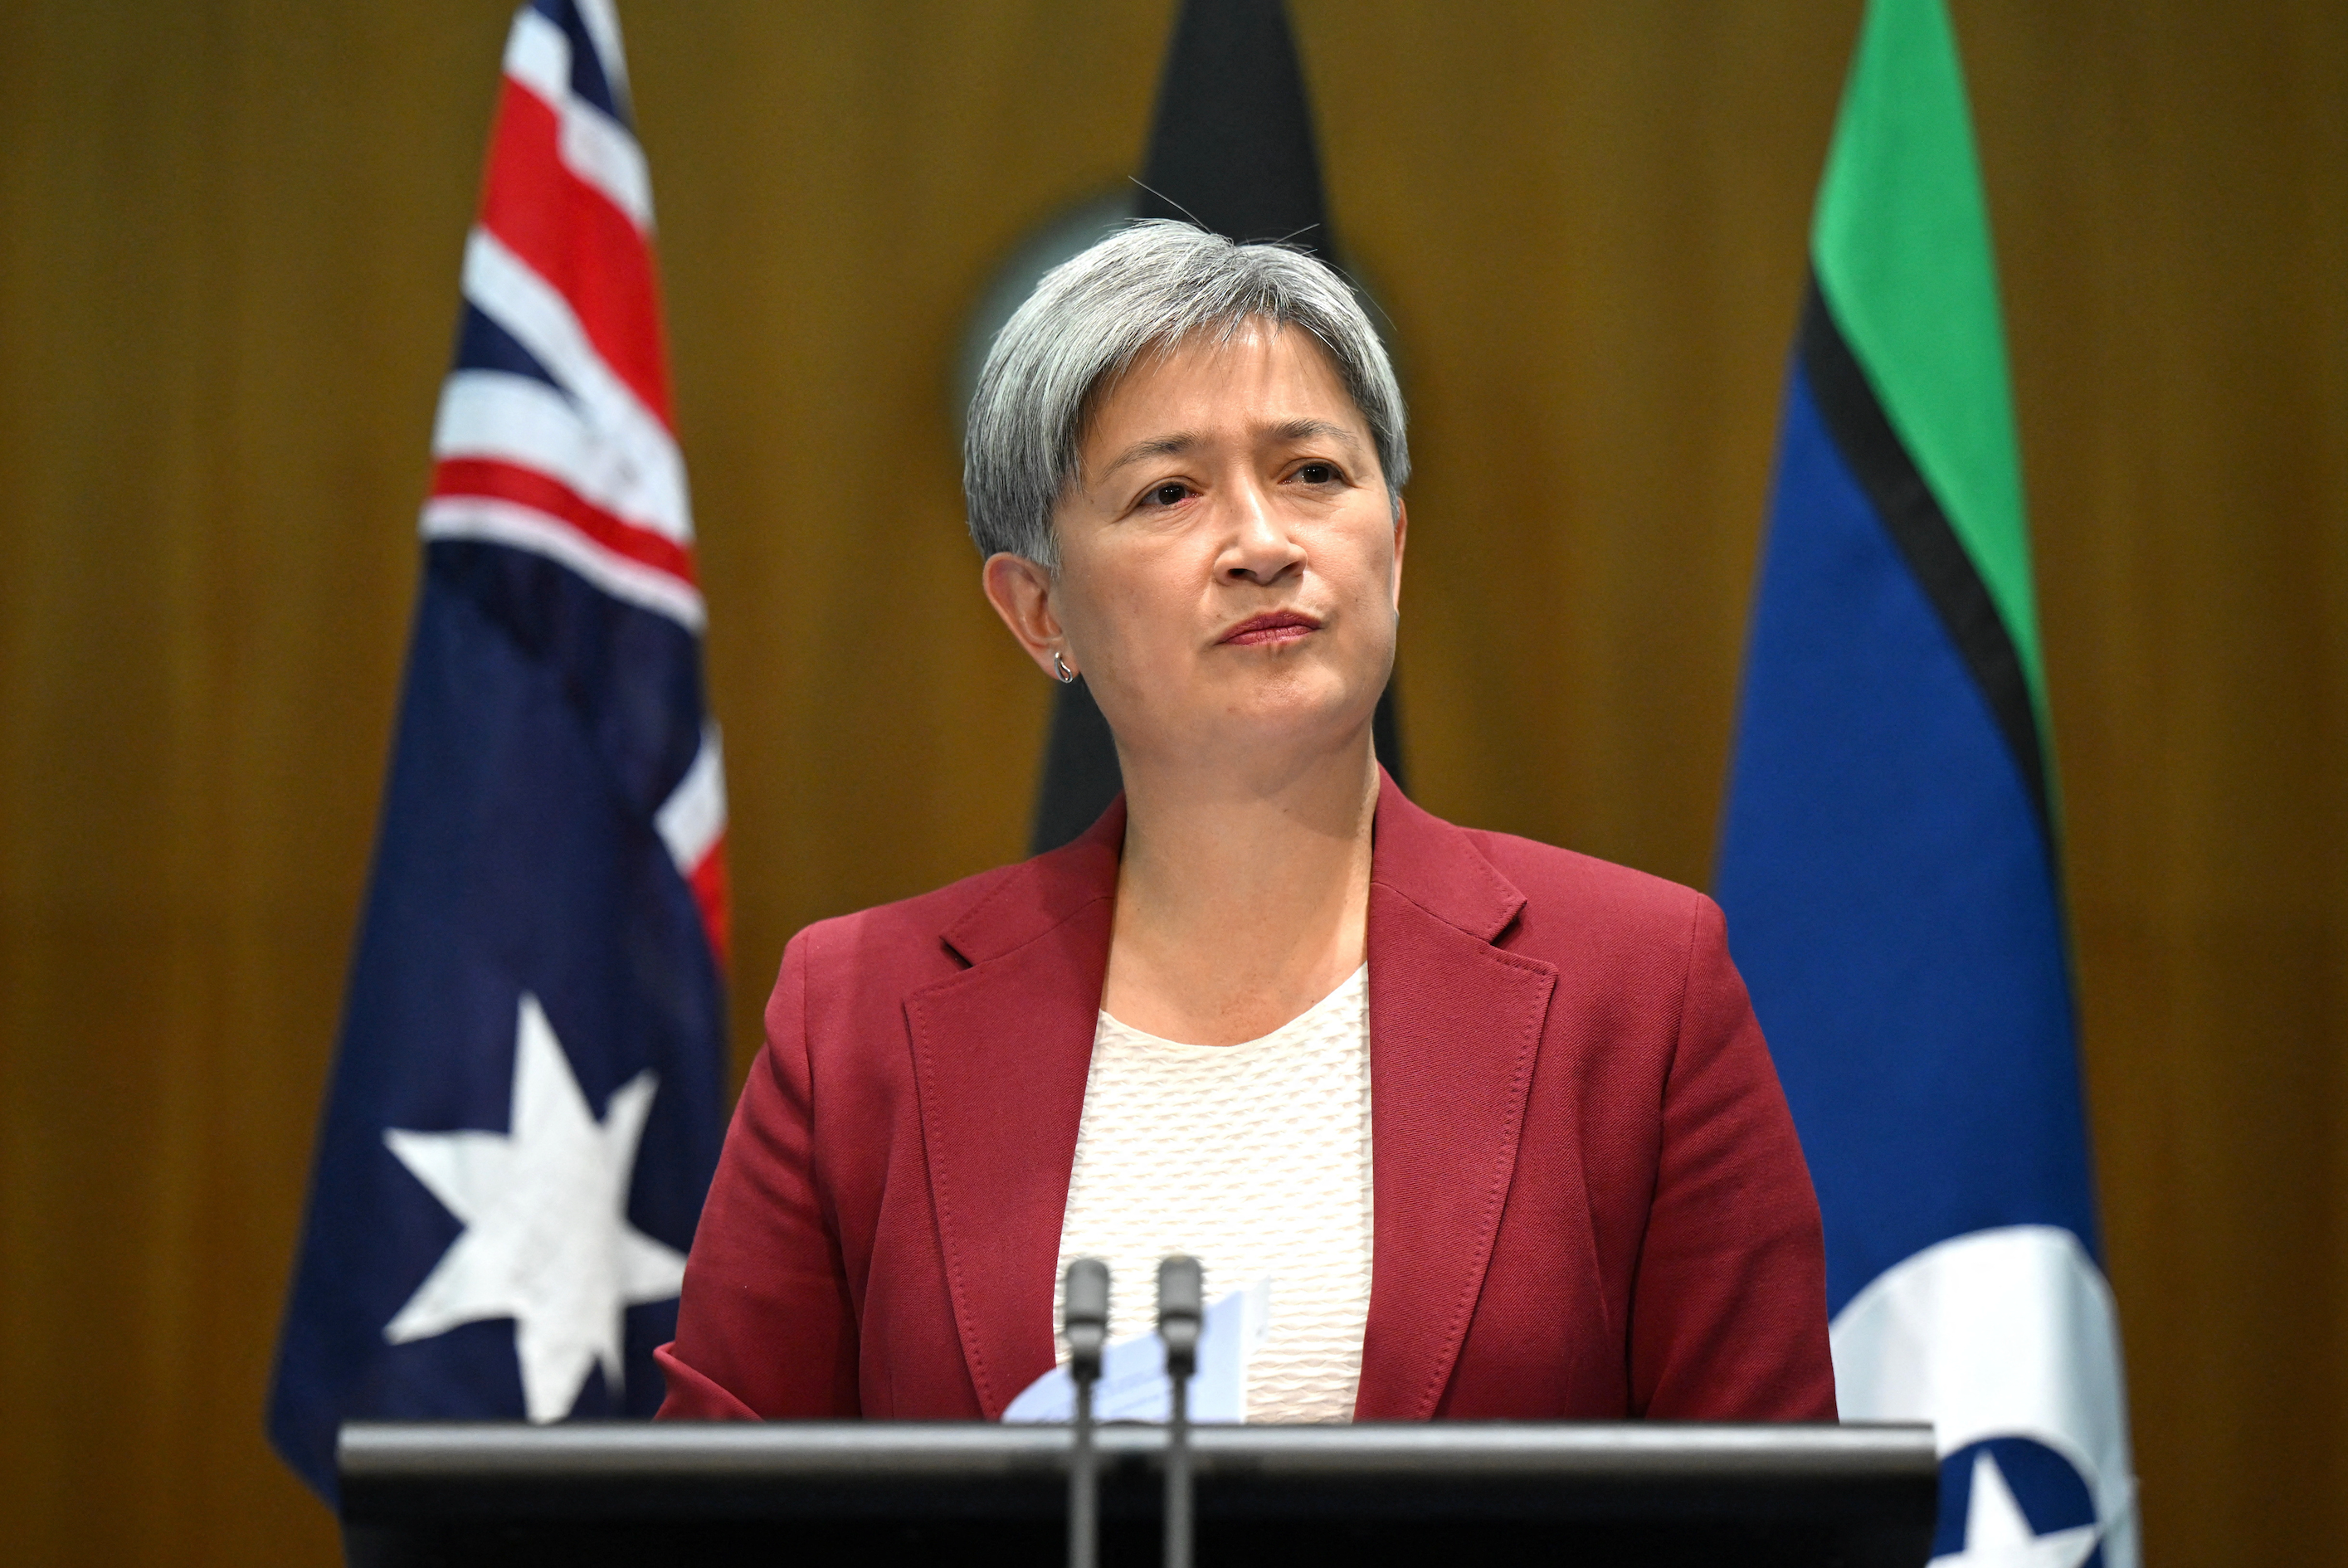 Australia to consider recognizing Palestinian state, foreign minister says